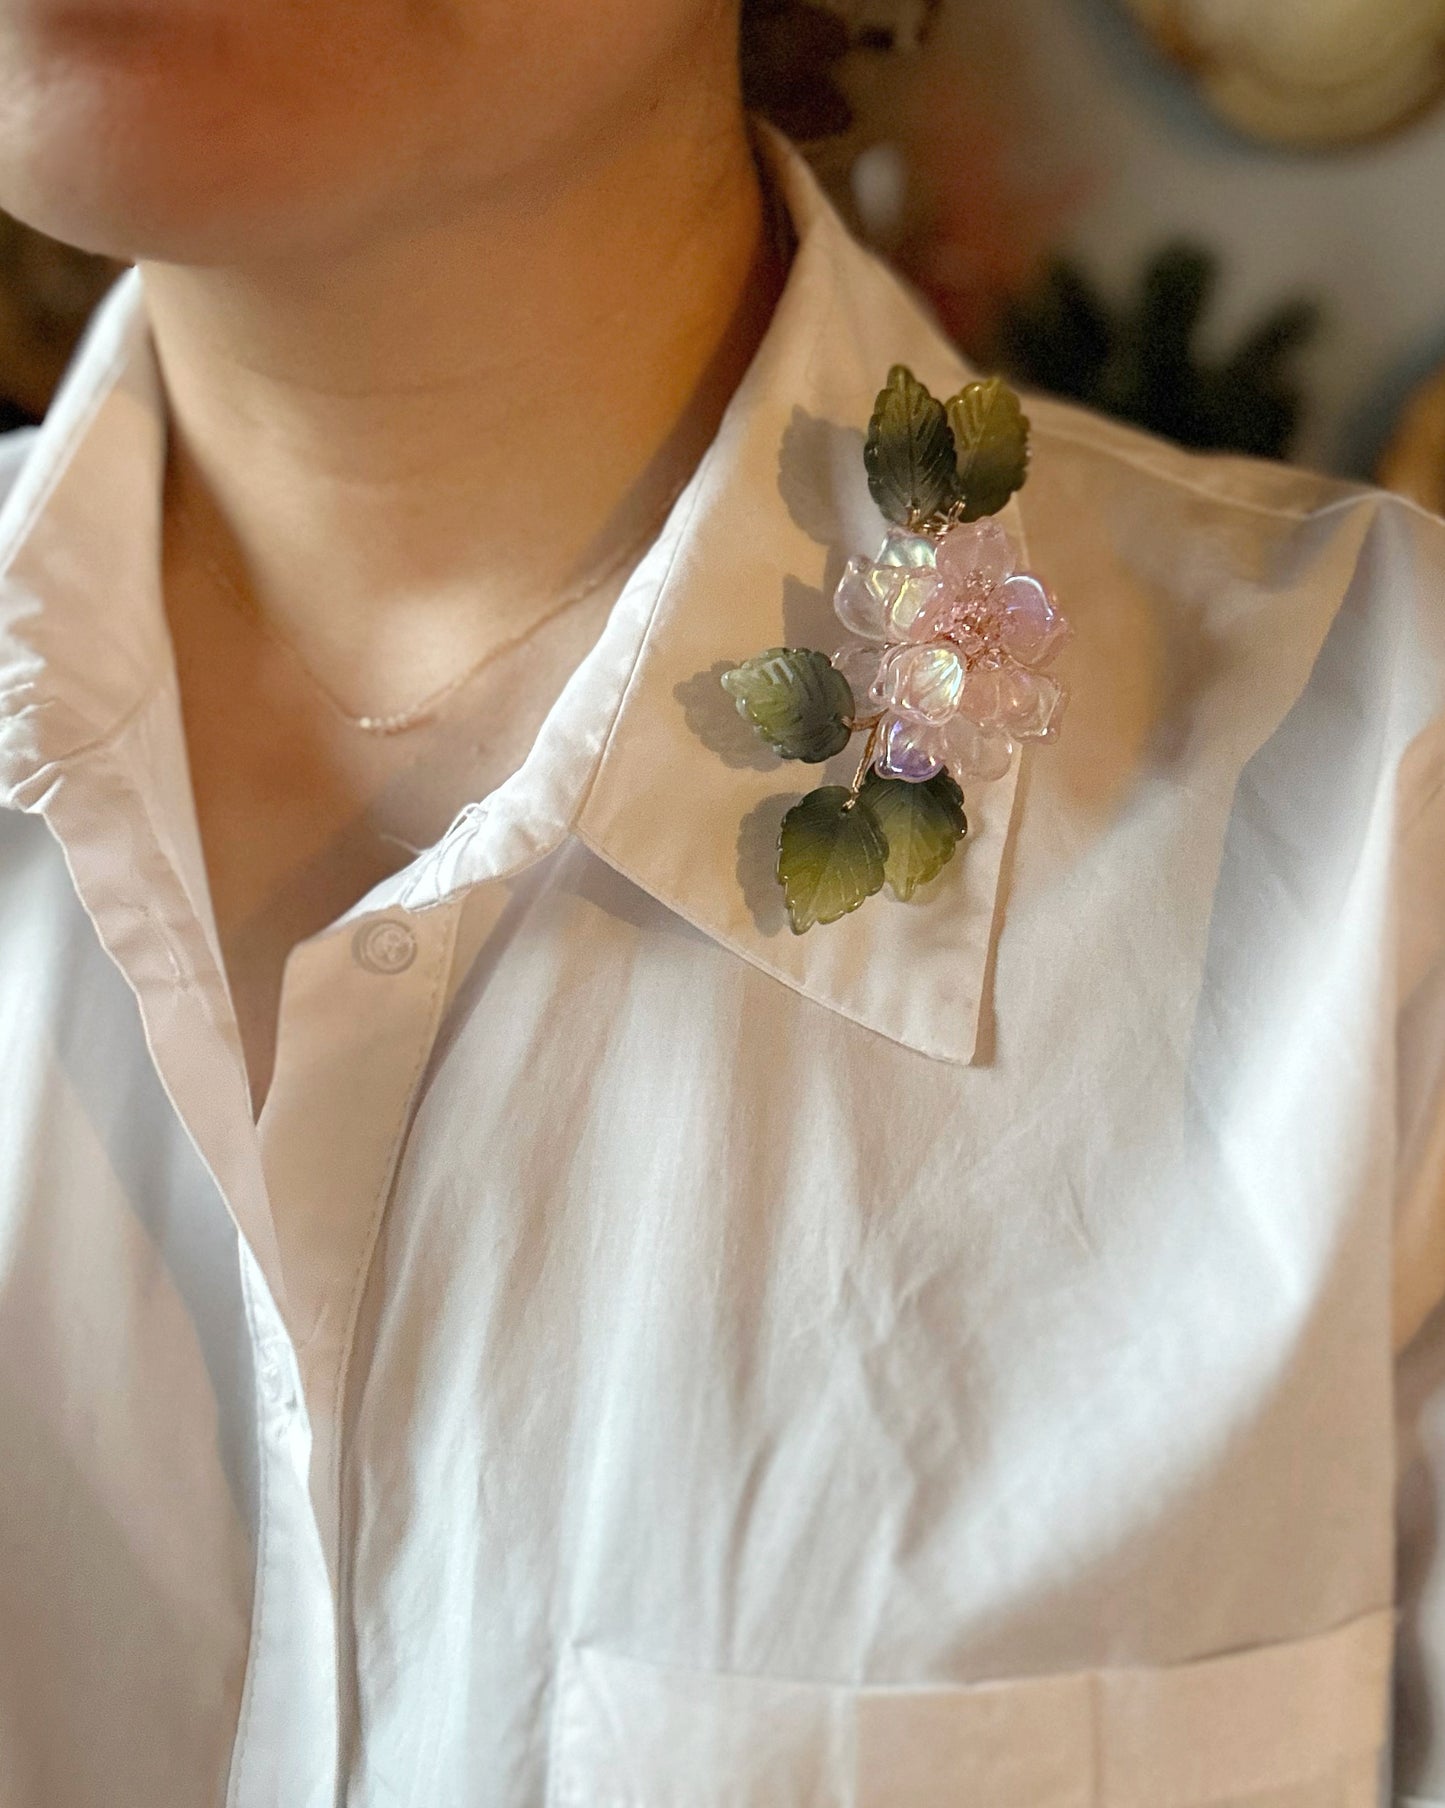 The new peony collar brooch in AB pink